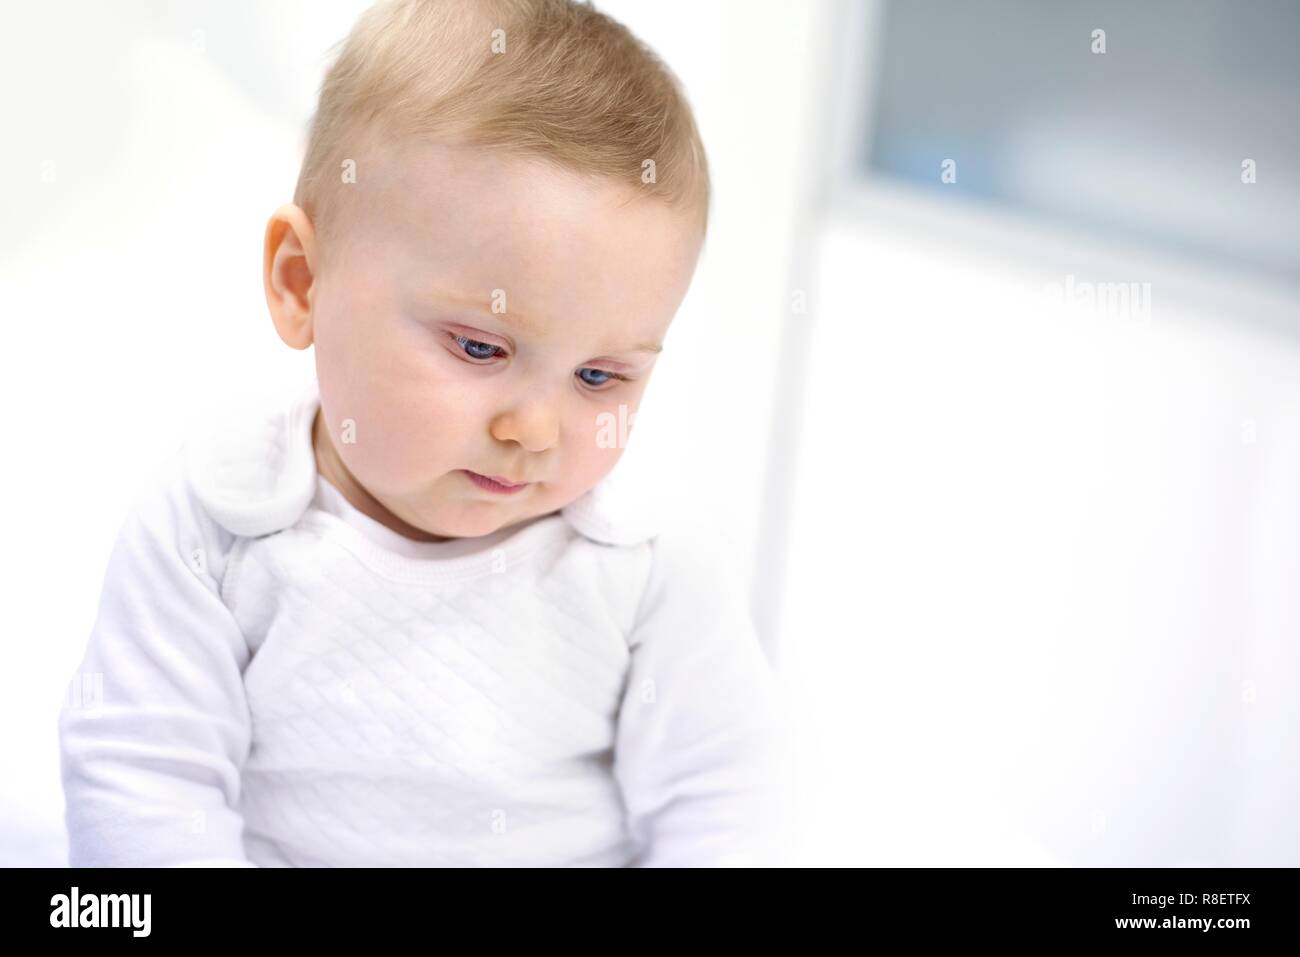 Baby boy looking down. Stock Photo